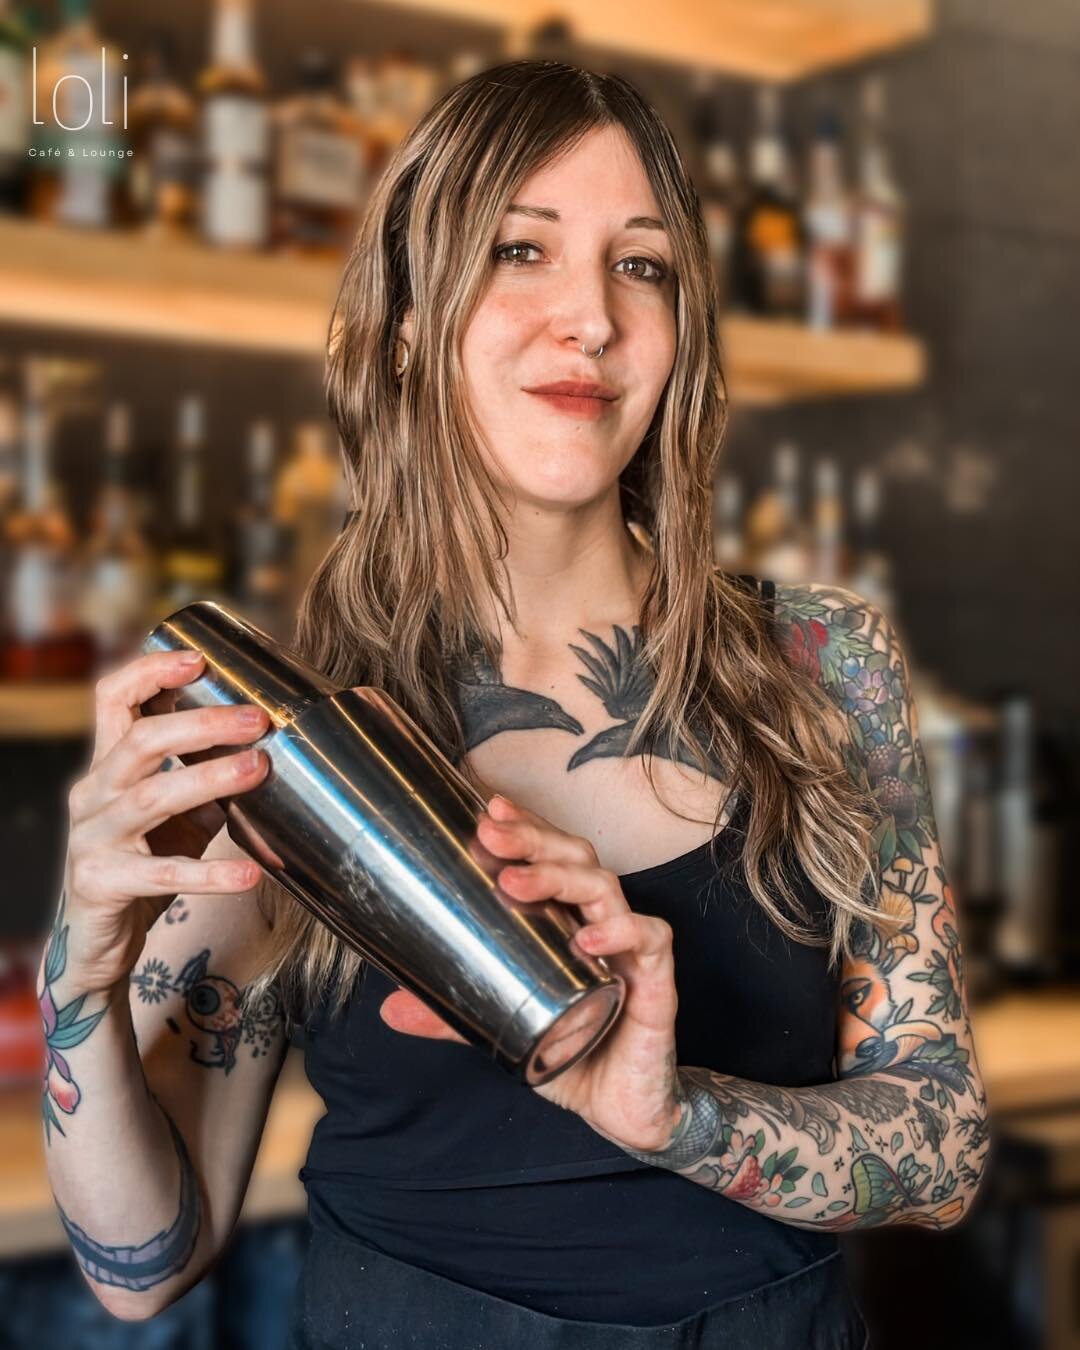 Congratulations are in order for our very own Sabrina! 

Using her expertise as an experienced bartender, she has crafted an original cocktail that has made it to the finals in the 1800 Tequila Competition!

Competing against Moncton Industry staff, 